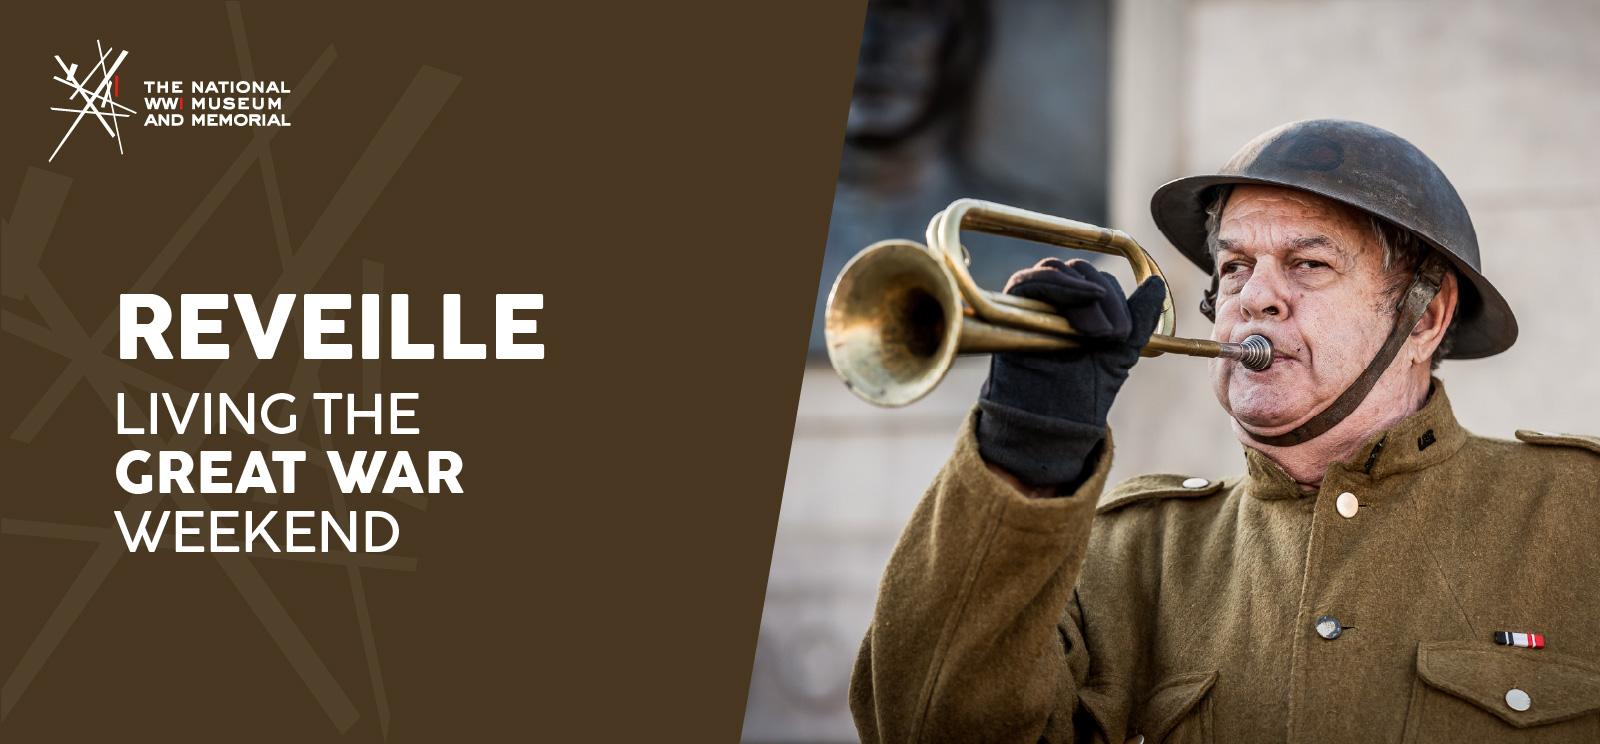 Image: Older white man in WWI uniform playing a bugle. Text: Reveille / Living the Great War Weekend